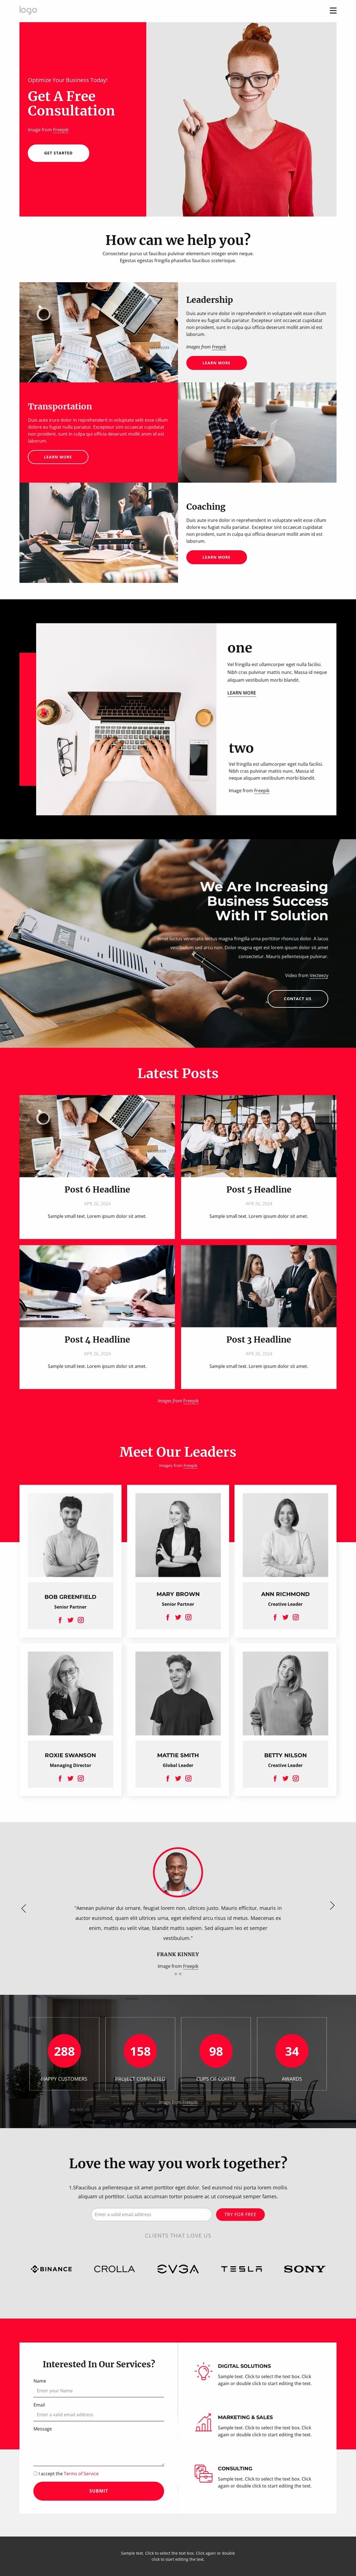 Business coaching and consulting Website Builder Templates